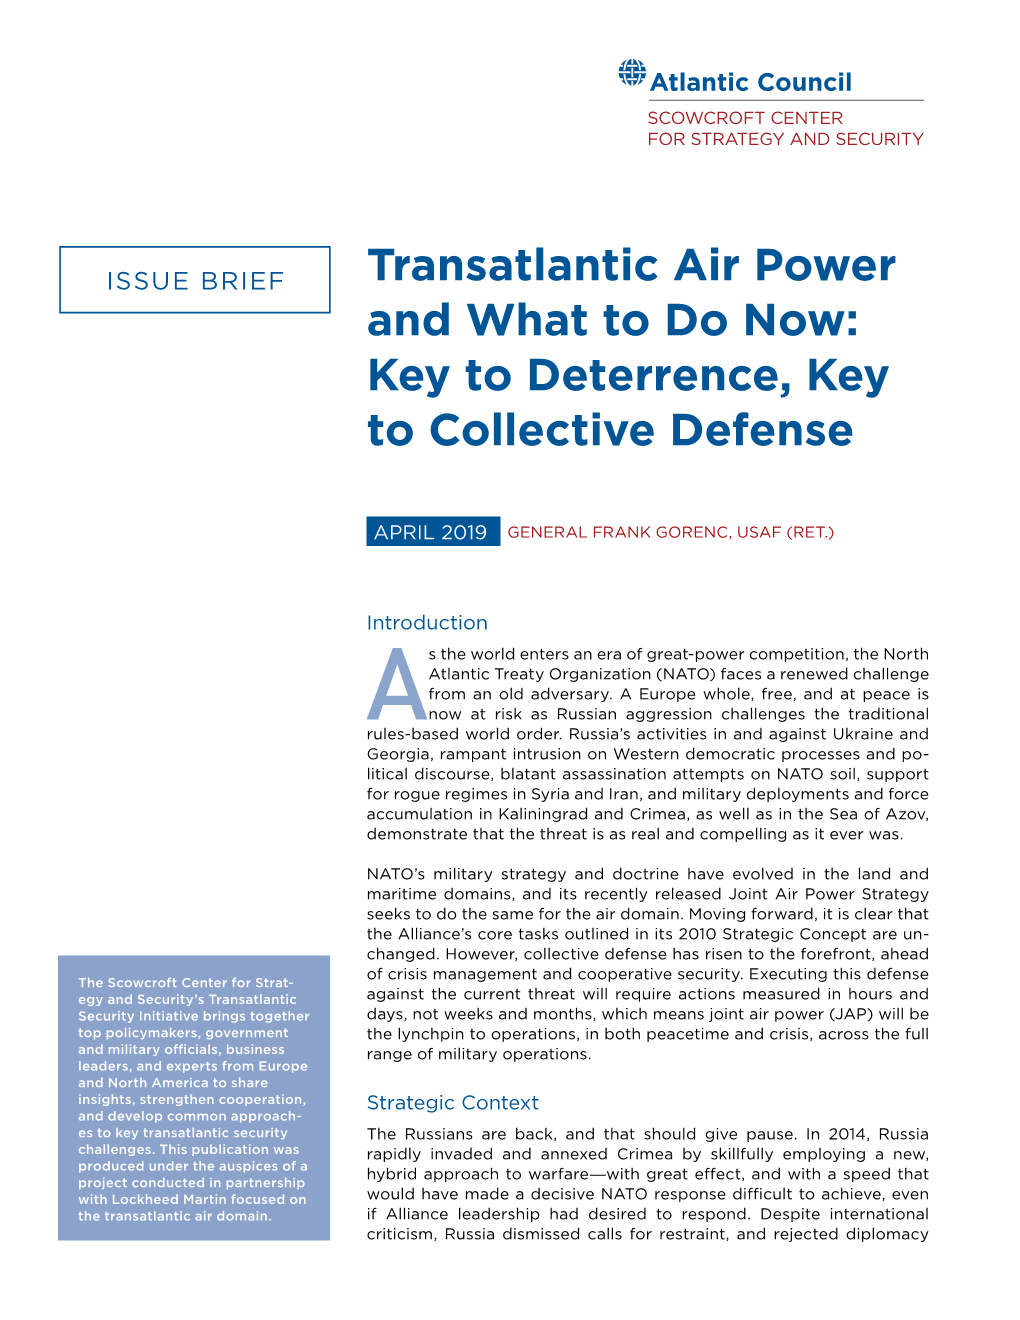 Transatlantic Air Power and What to Do Now: Key to Deterrence, Key to Collective Defense